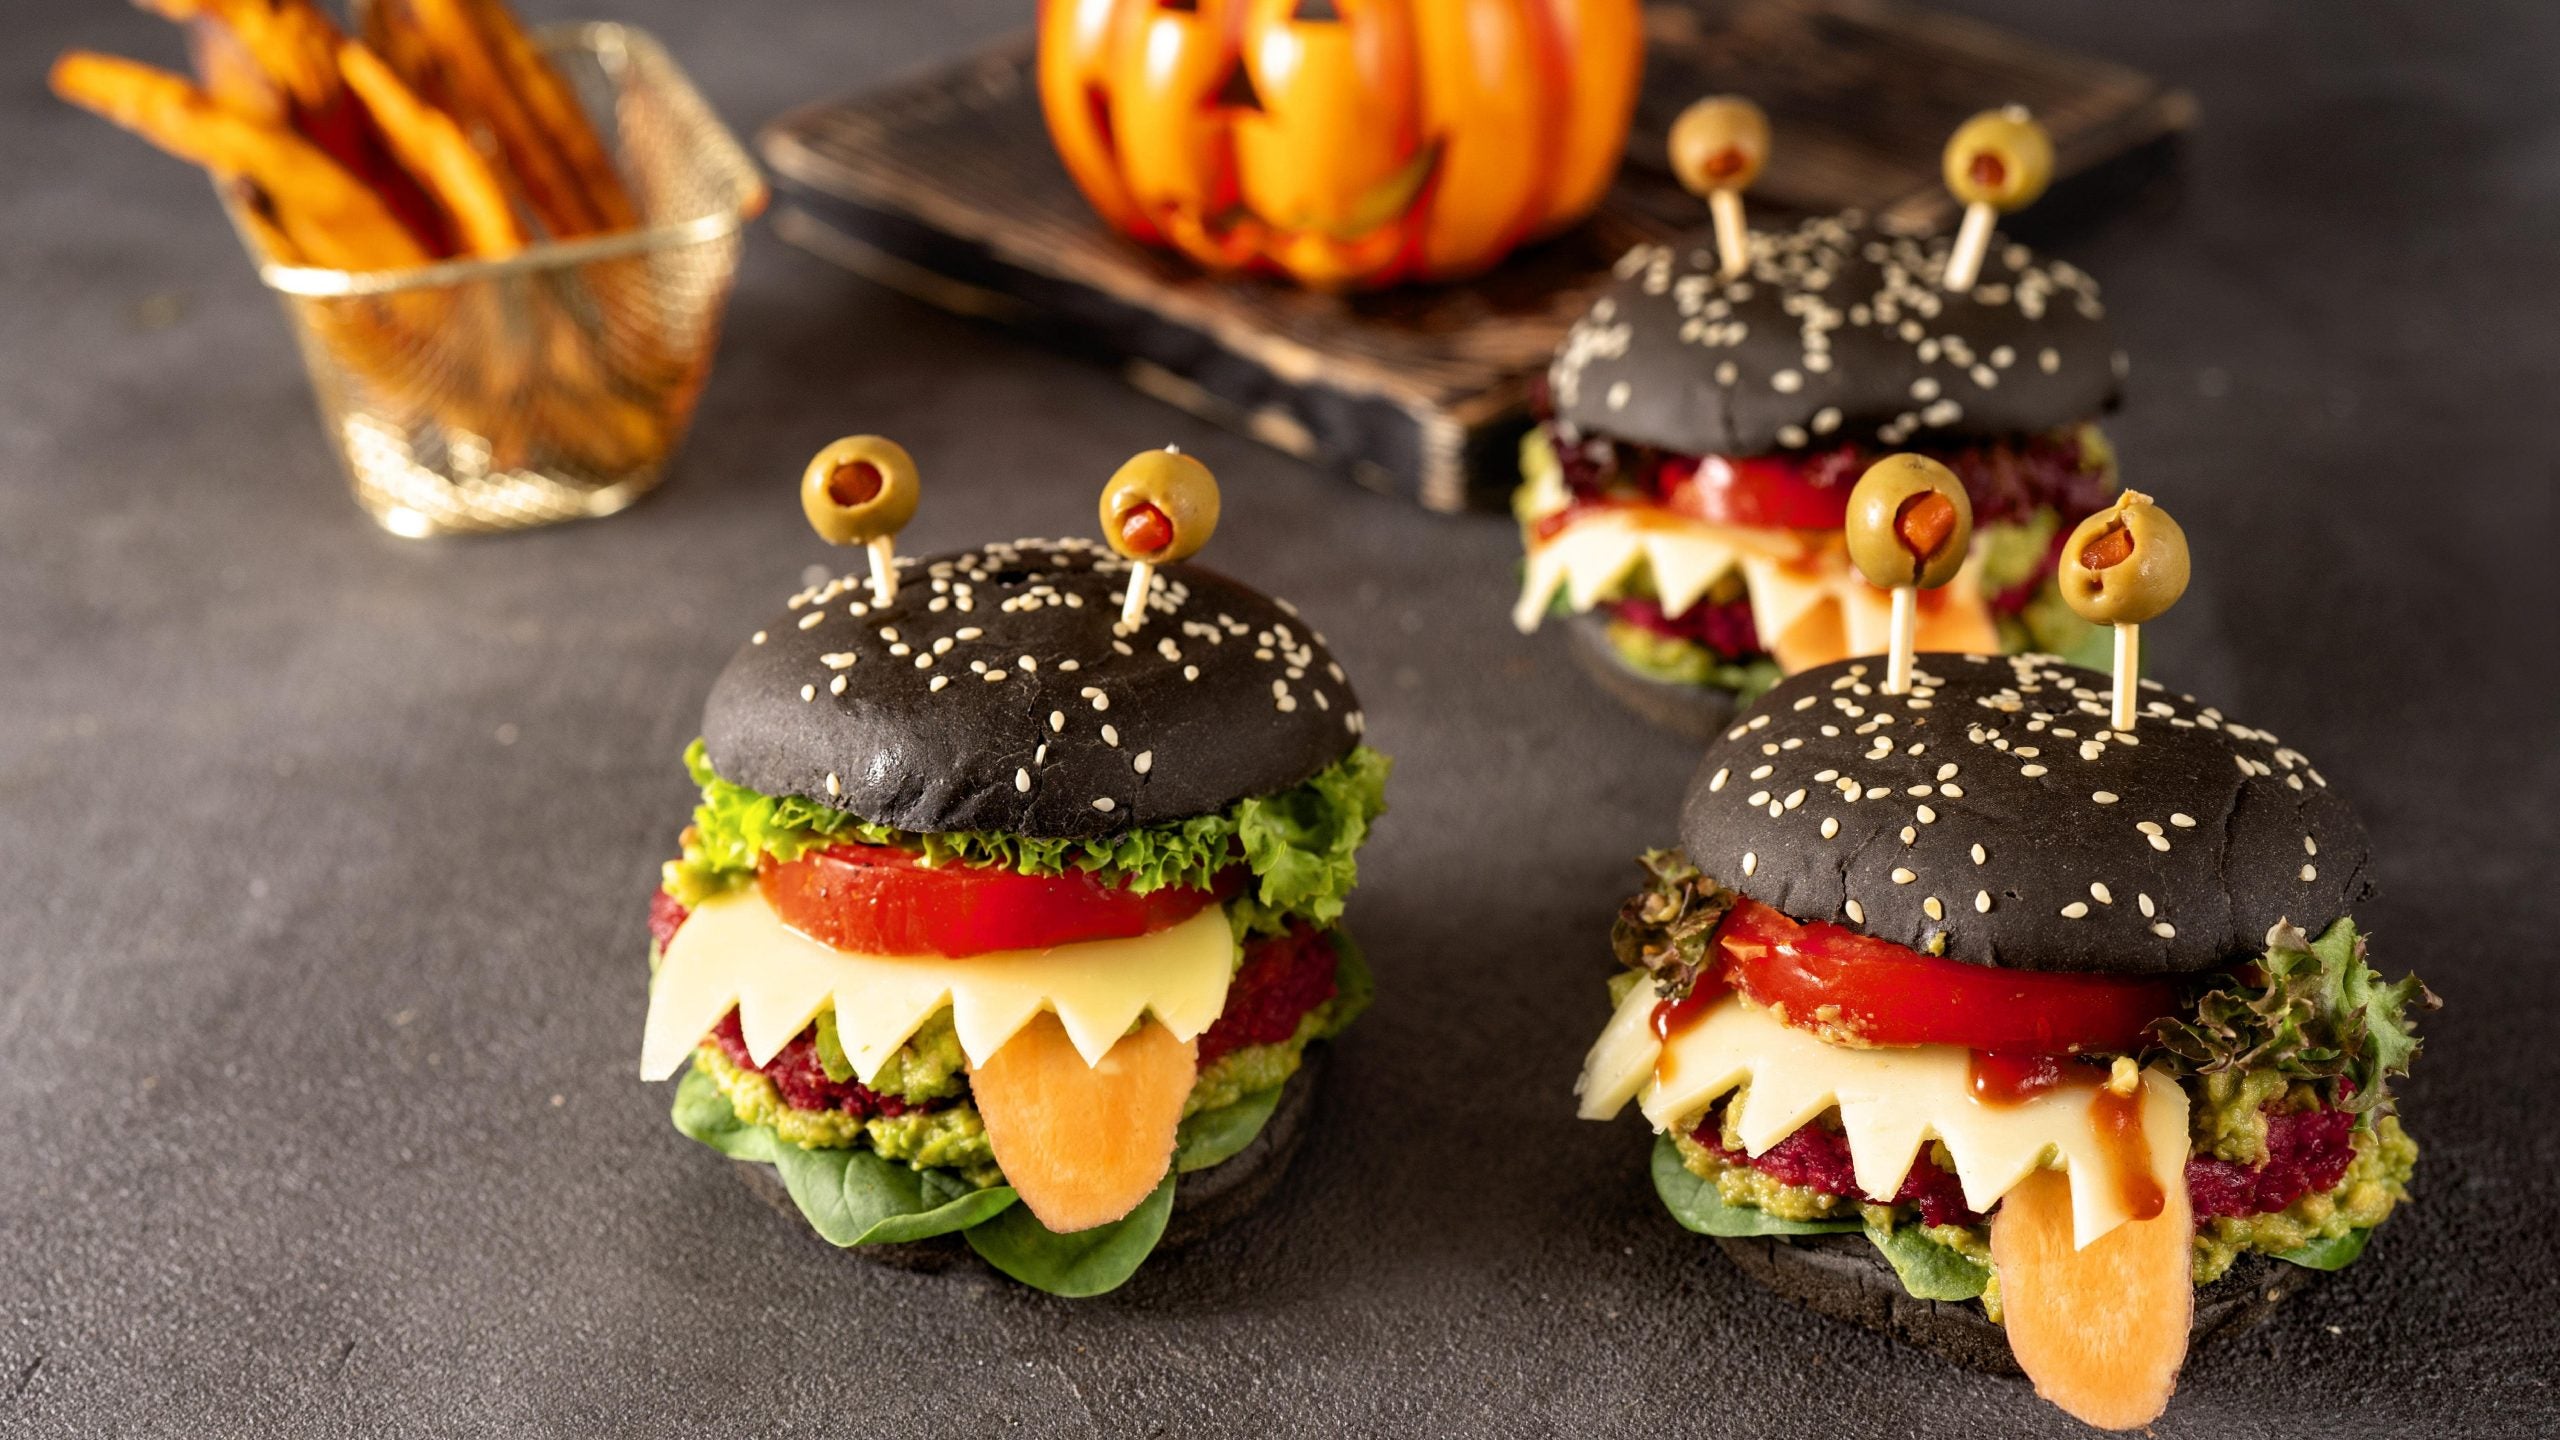 Scary Monster Bison Burgers For A Fun Halloween Dinner - Beck & Bulow